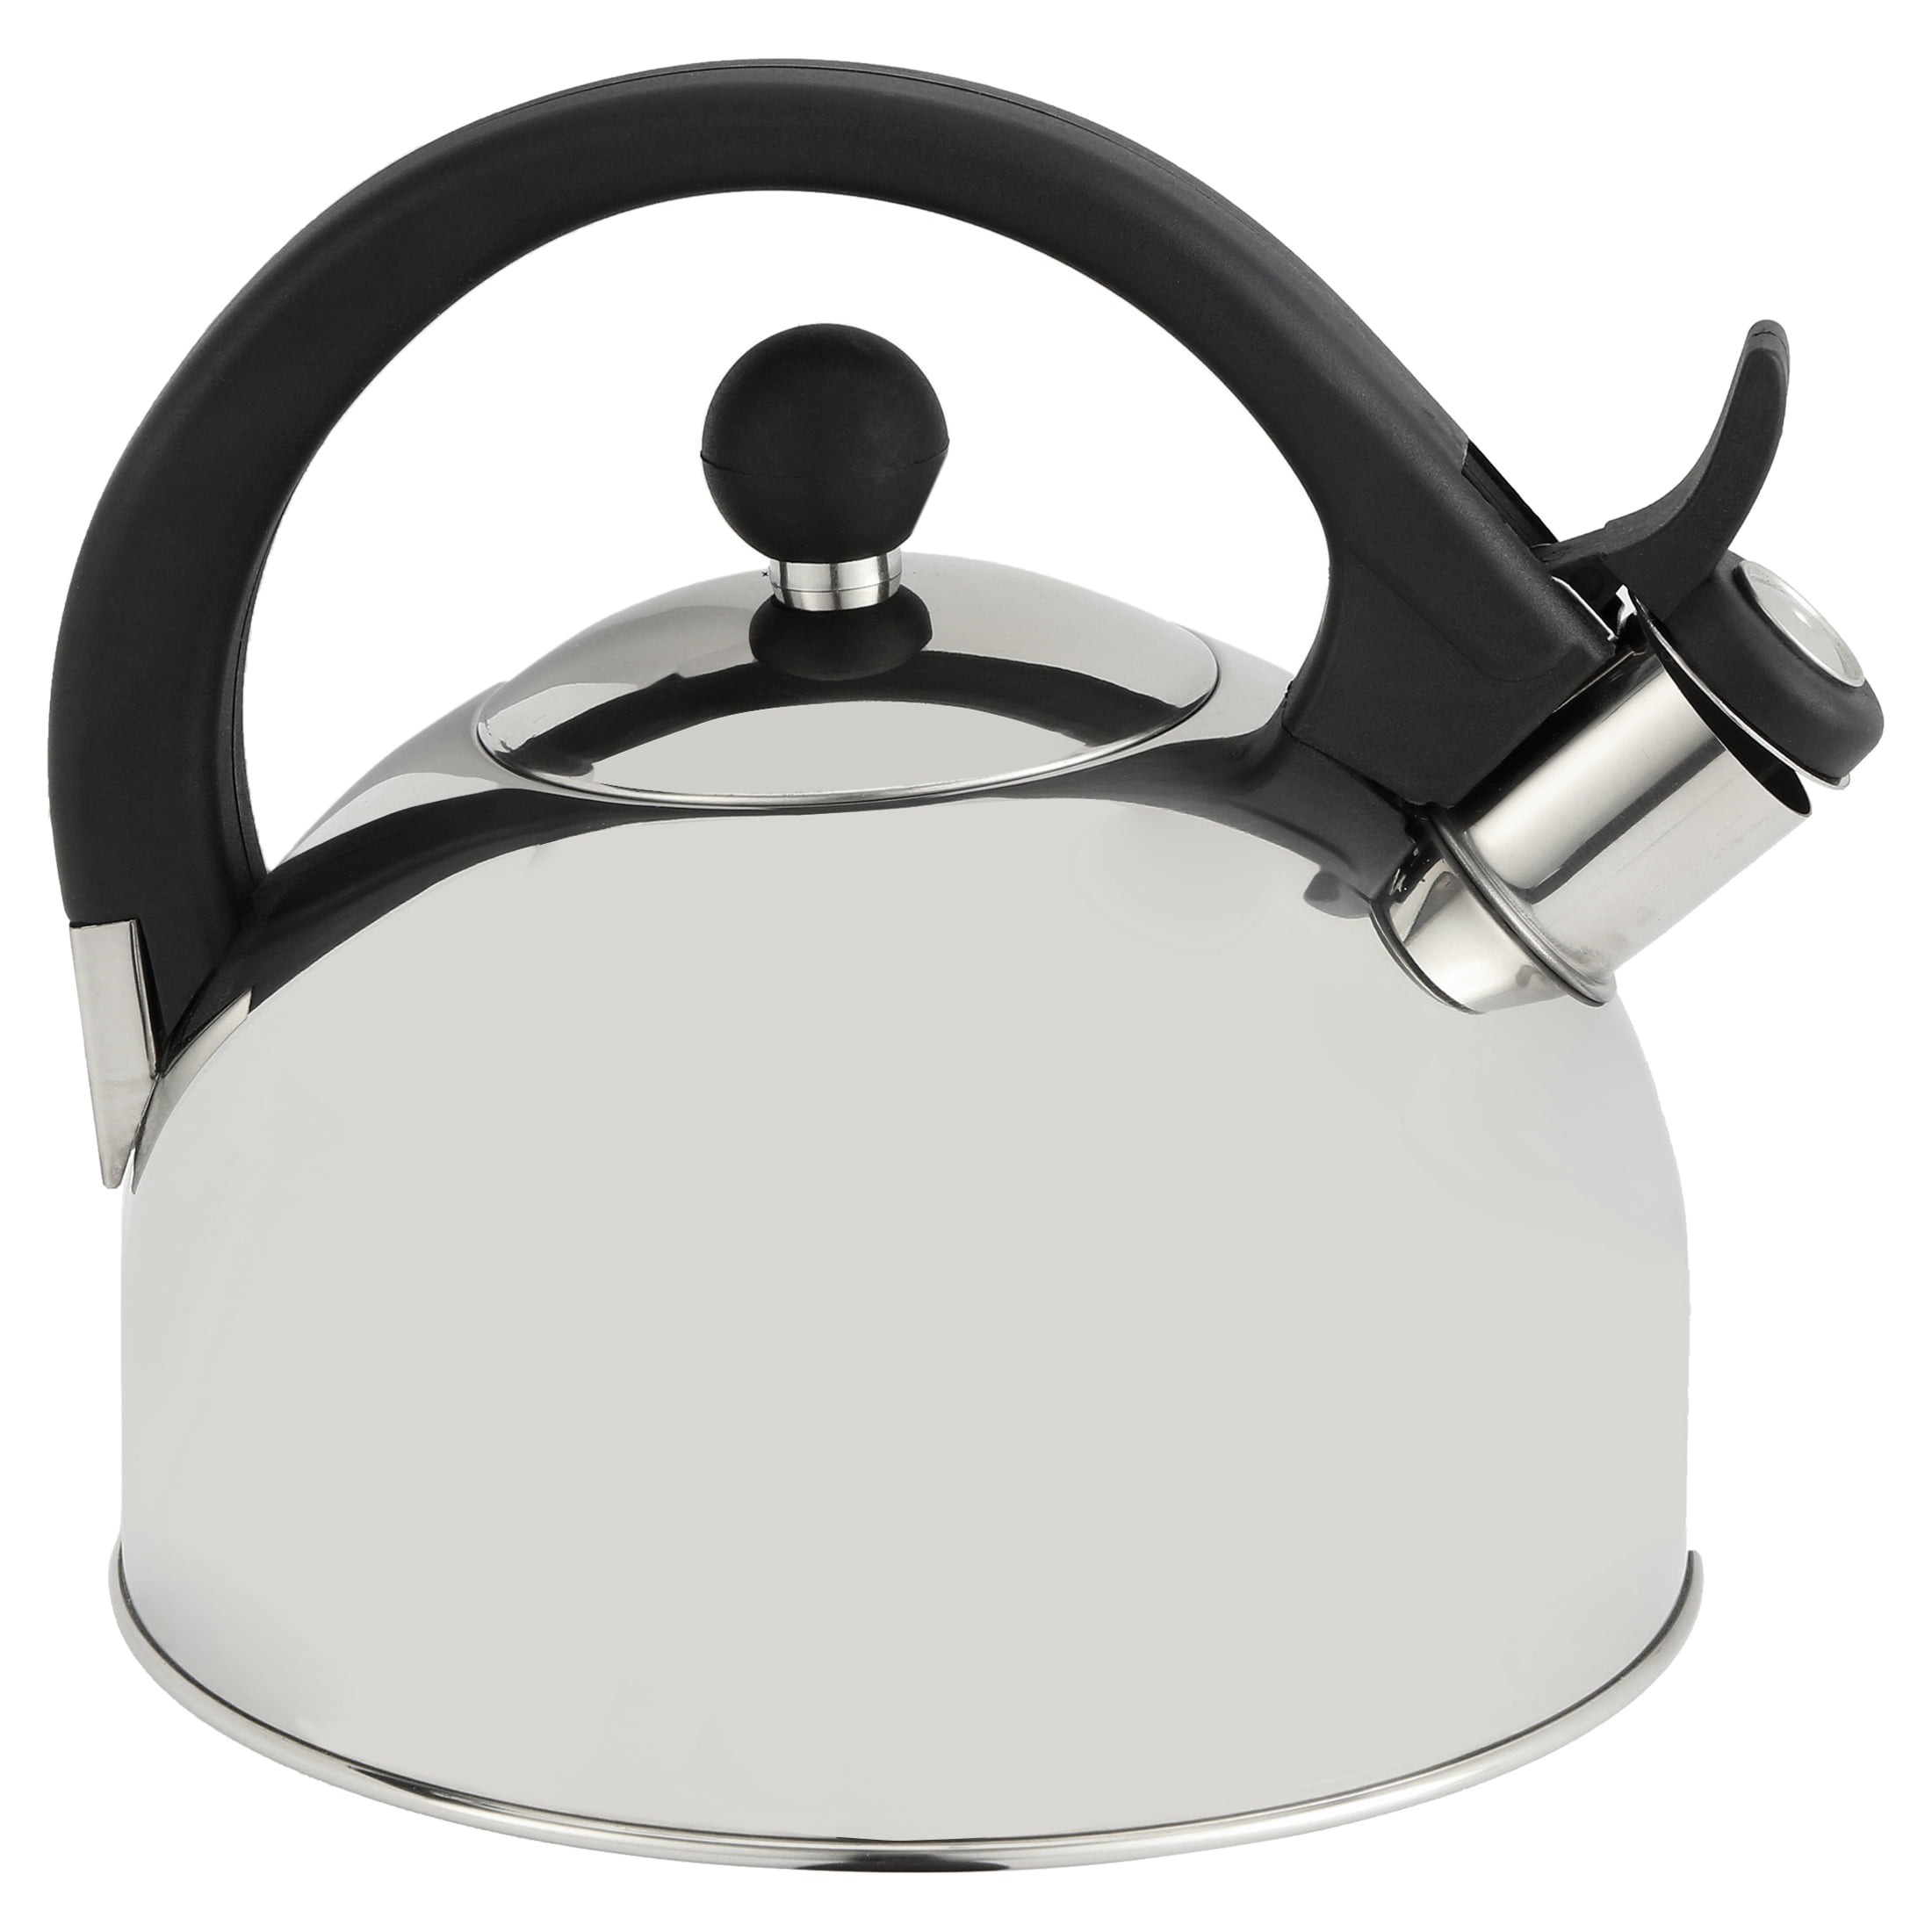 Details about   Stovetop Tea Kettle 2.64 Qt Whistling Teakettle Stainless Steel Teapot Coffee 